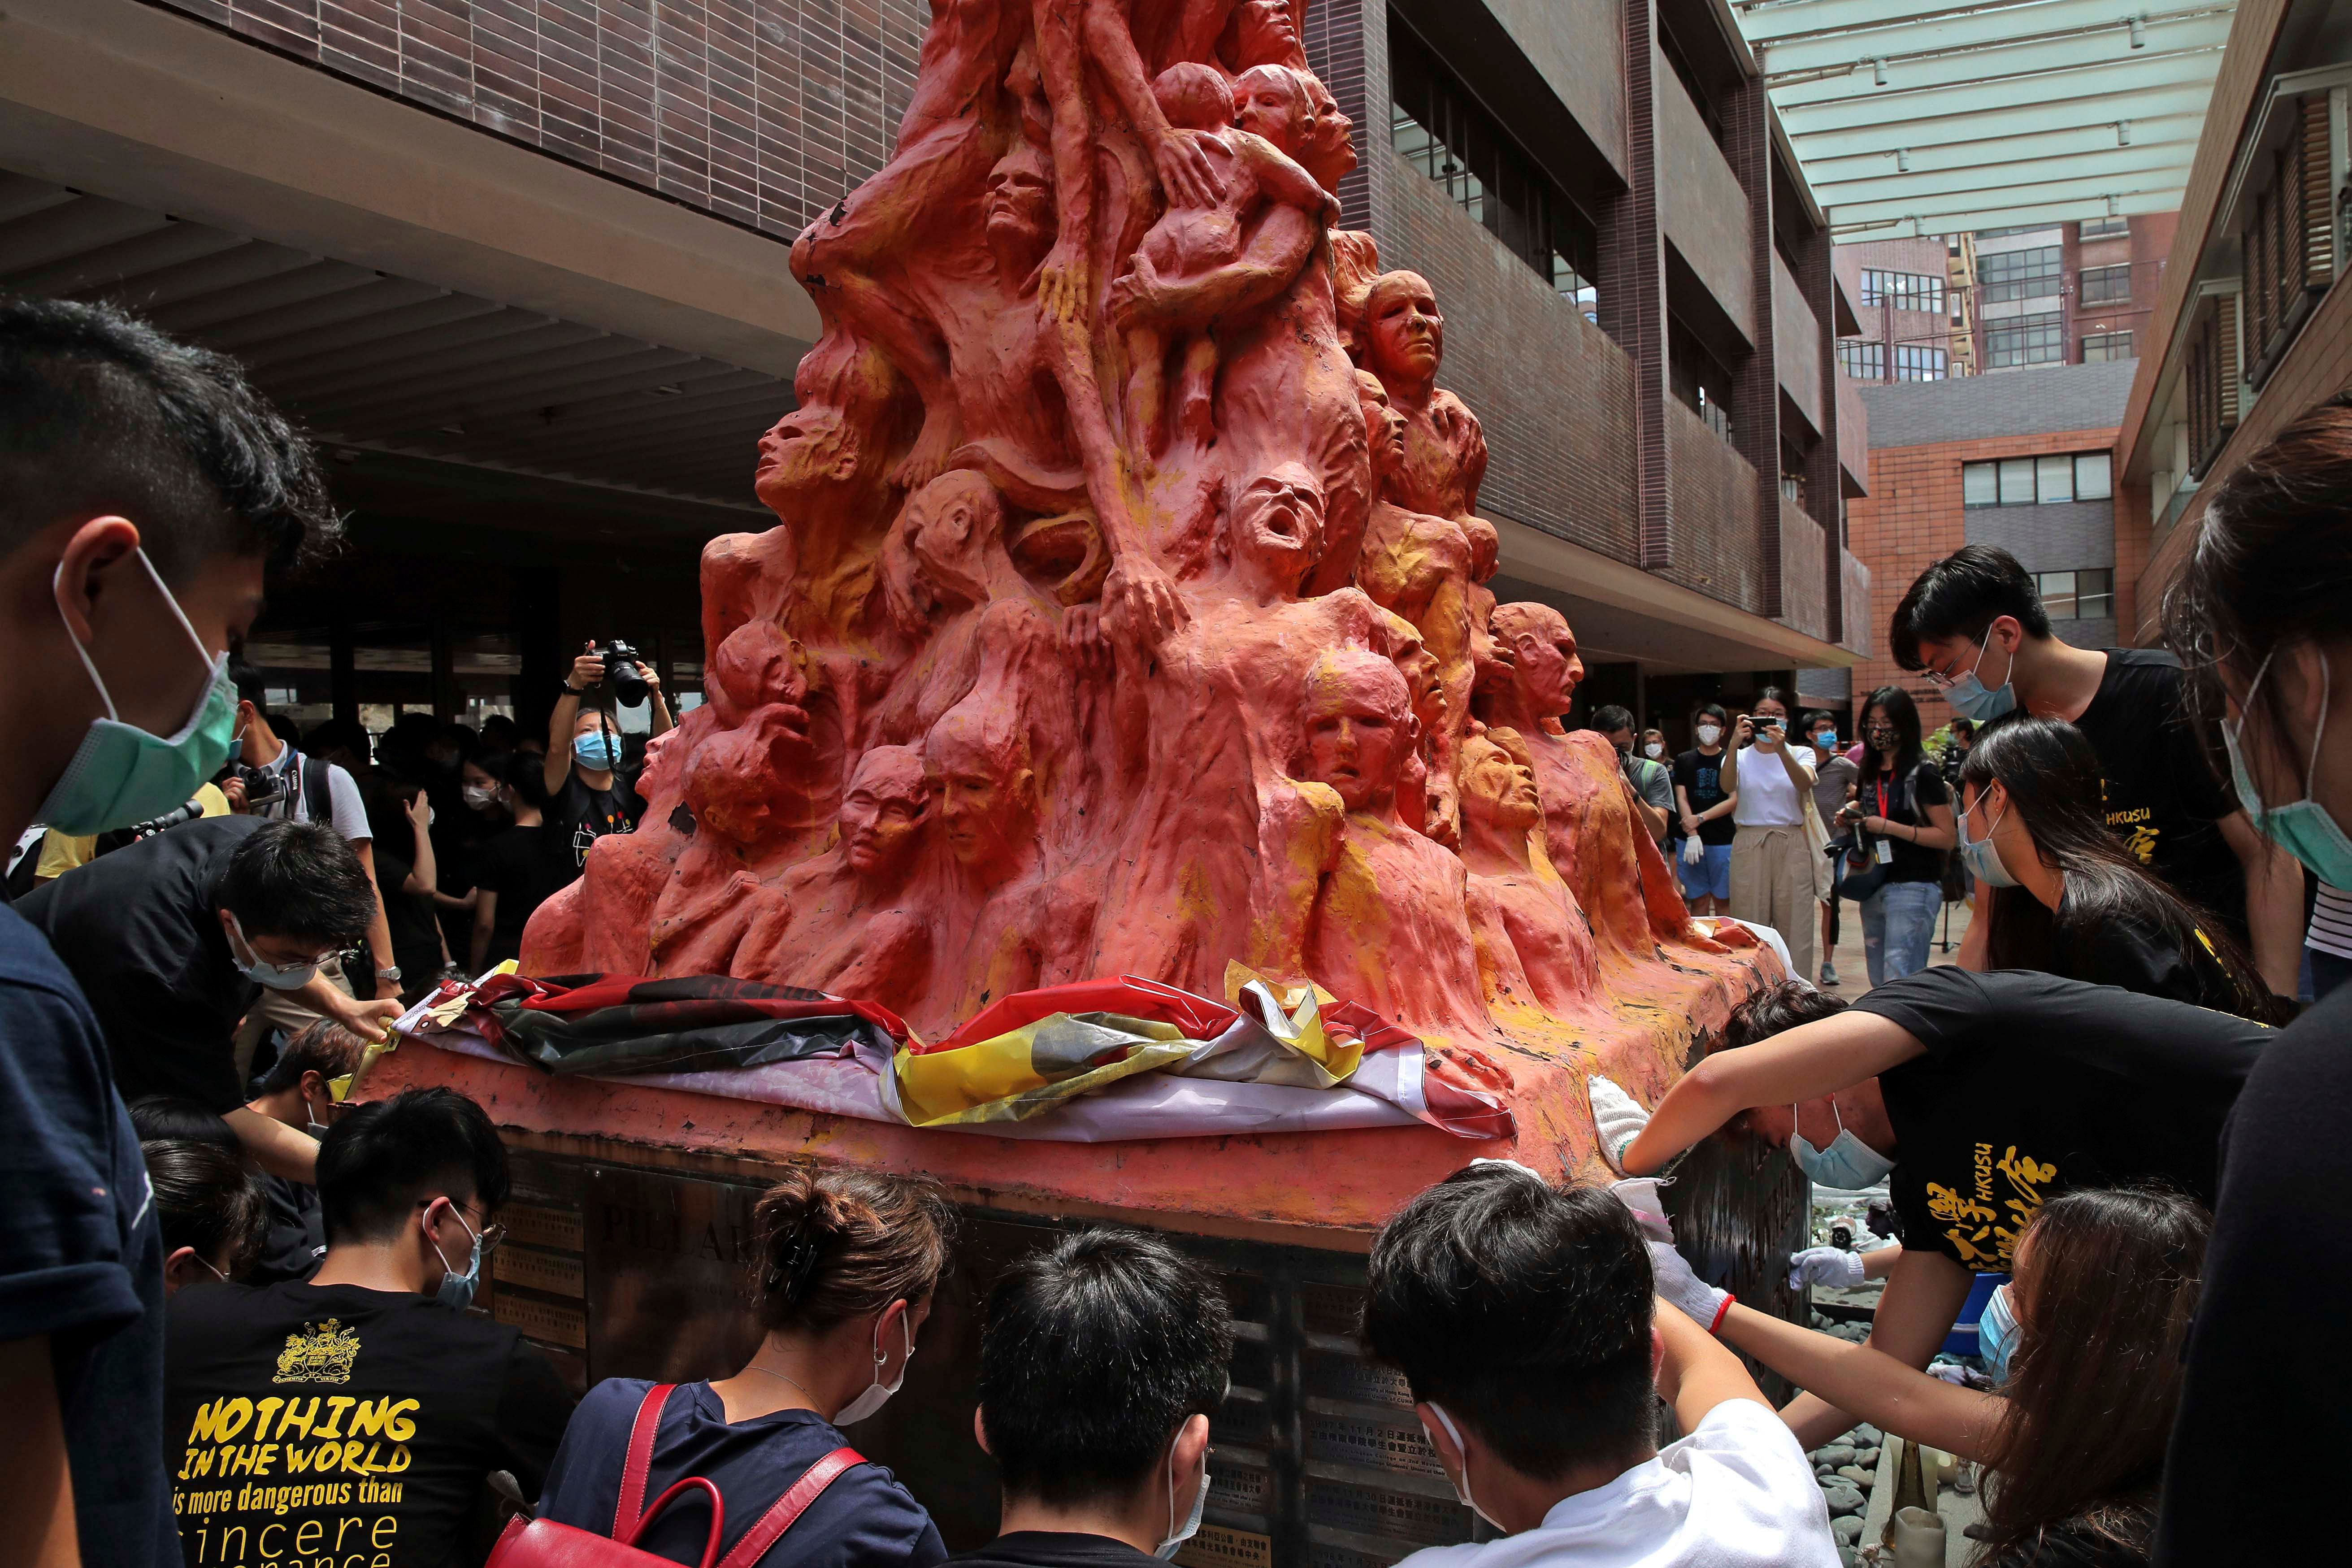 University students clean the "Pillar of Shame" statue, a memorial for those killed in the 1989 Tiananmen crackdown, at the University of Hong Kong, Thursday, June 4, 2020. China is tightening controls over dissidents while pro-democracy activists in Hong Kong and elsewhere try to mark the 31st anniversary of the crushing of the pro-democracy movement in Beijing's Tiananmen Square. Credit: AP/PTI